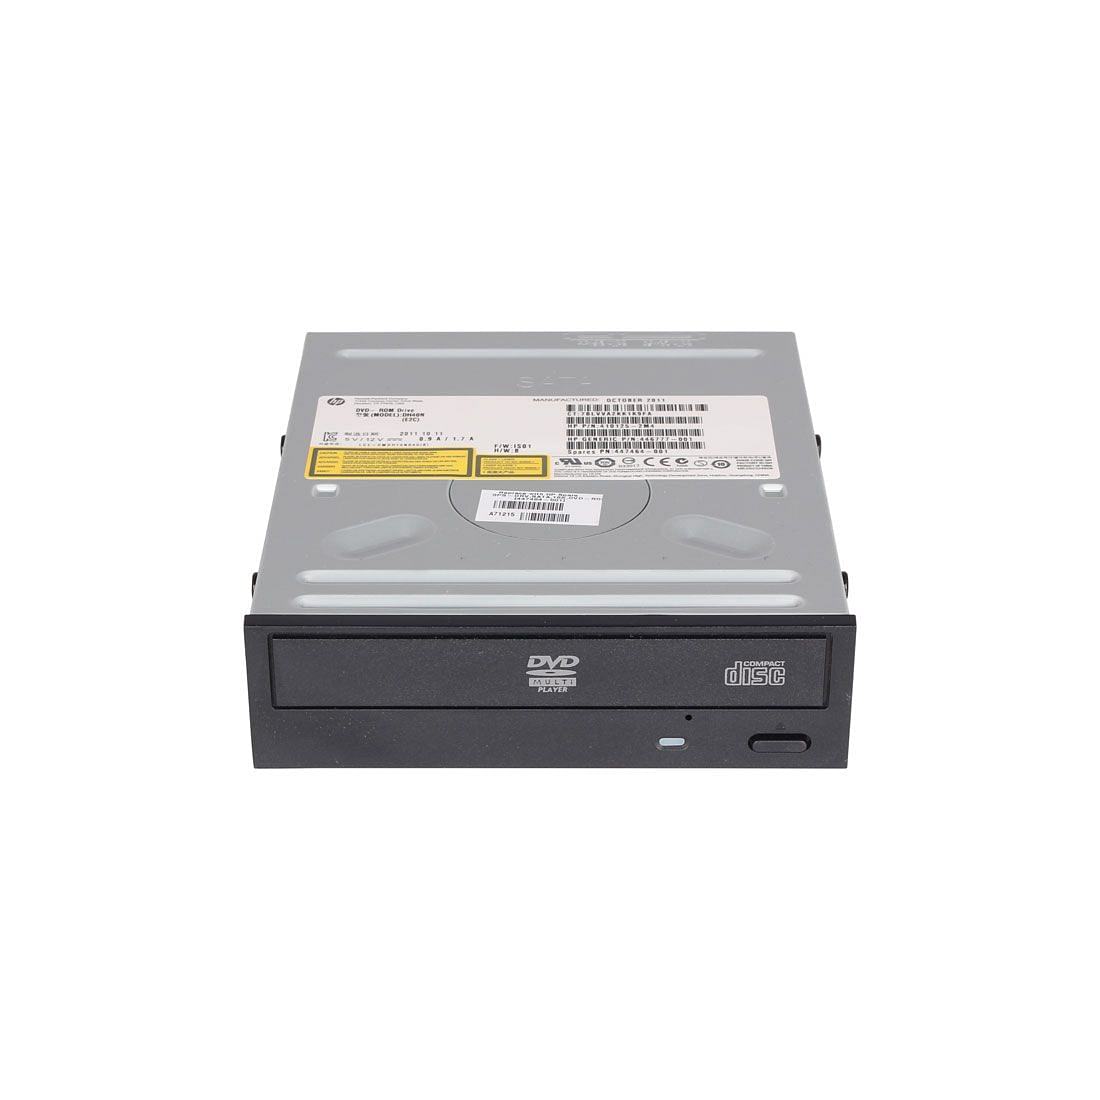 OPTICAL DRIVE, 5.2GB INT W/4MB CACHE Information Technology DEX 